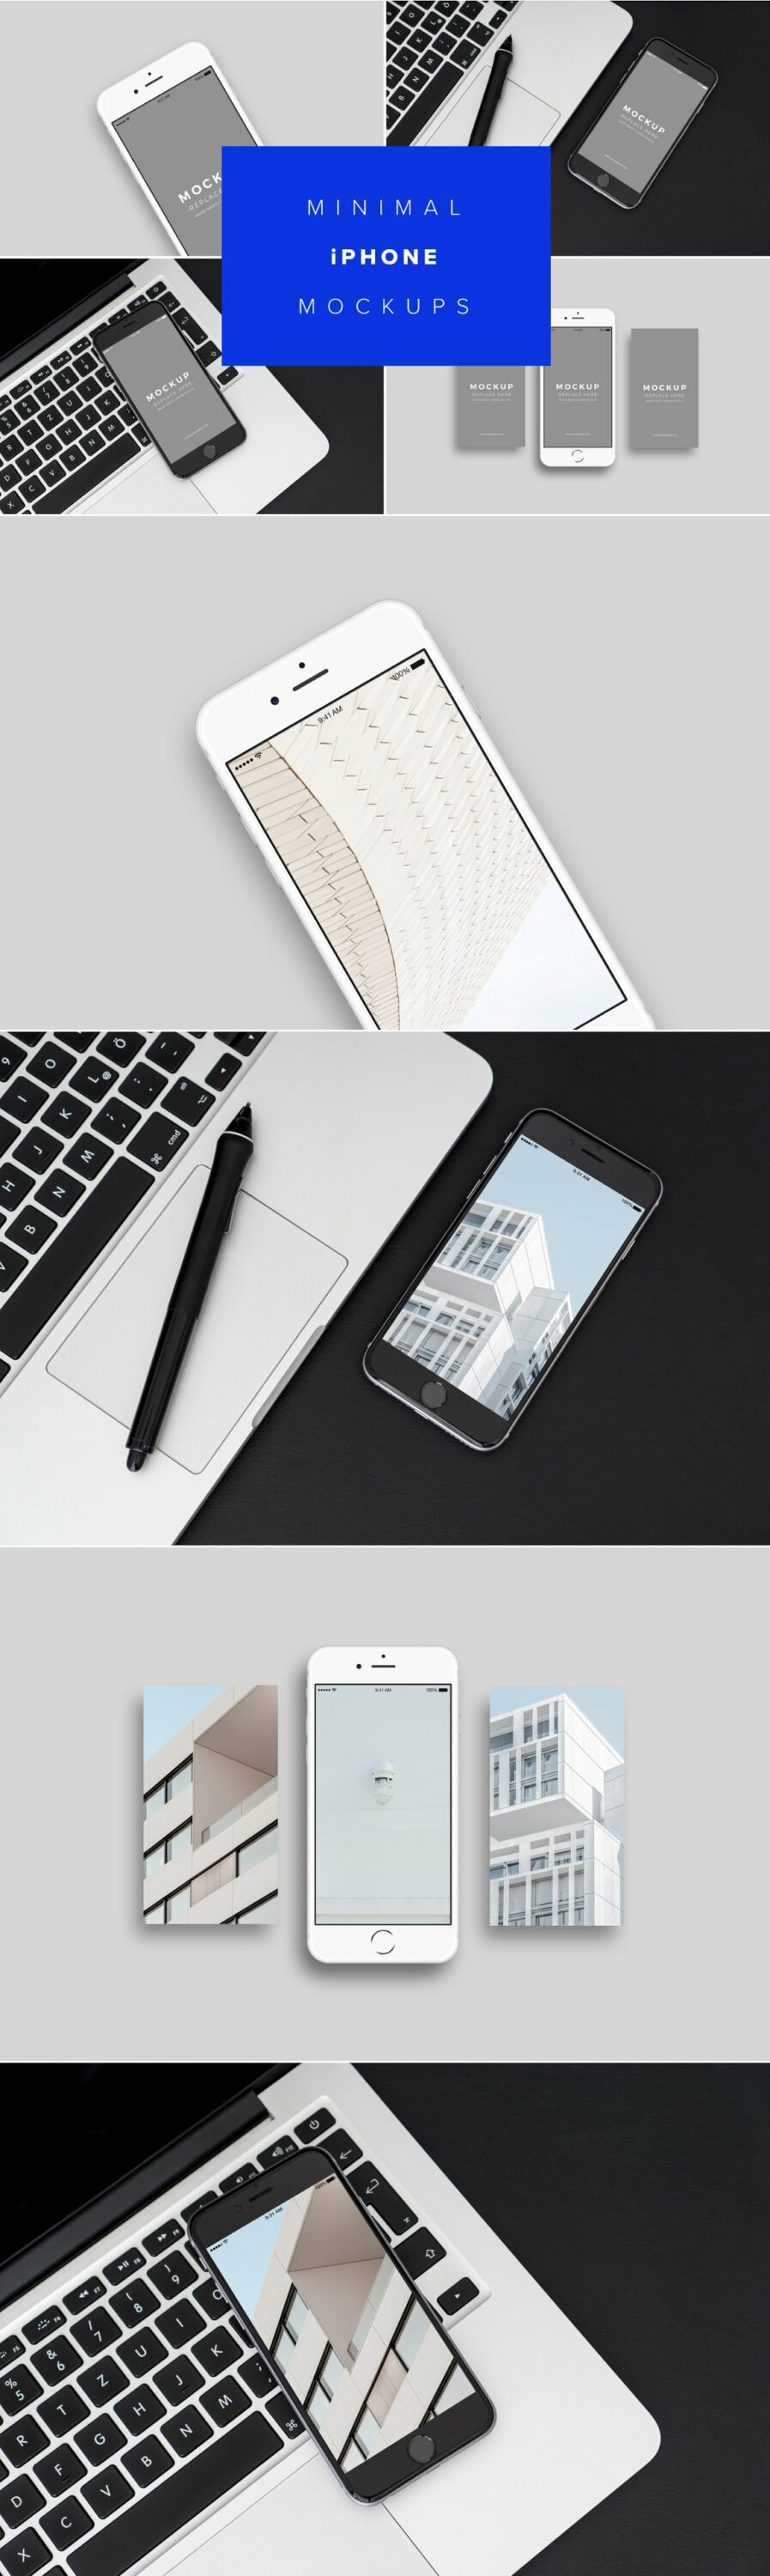 The lettering "Minimal IPhone Mockups" on a blue background and 8 IPhone images.